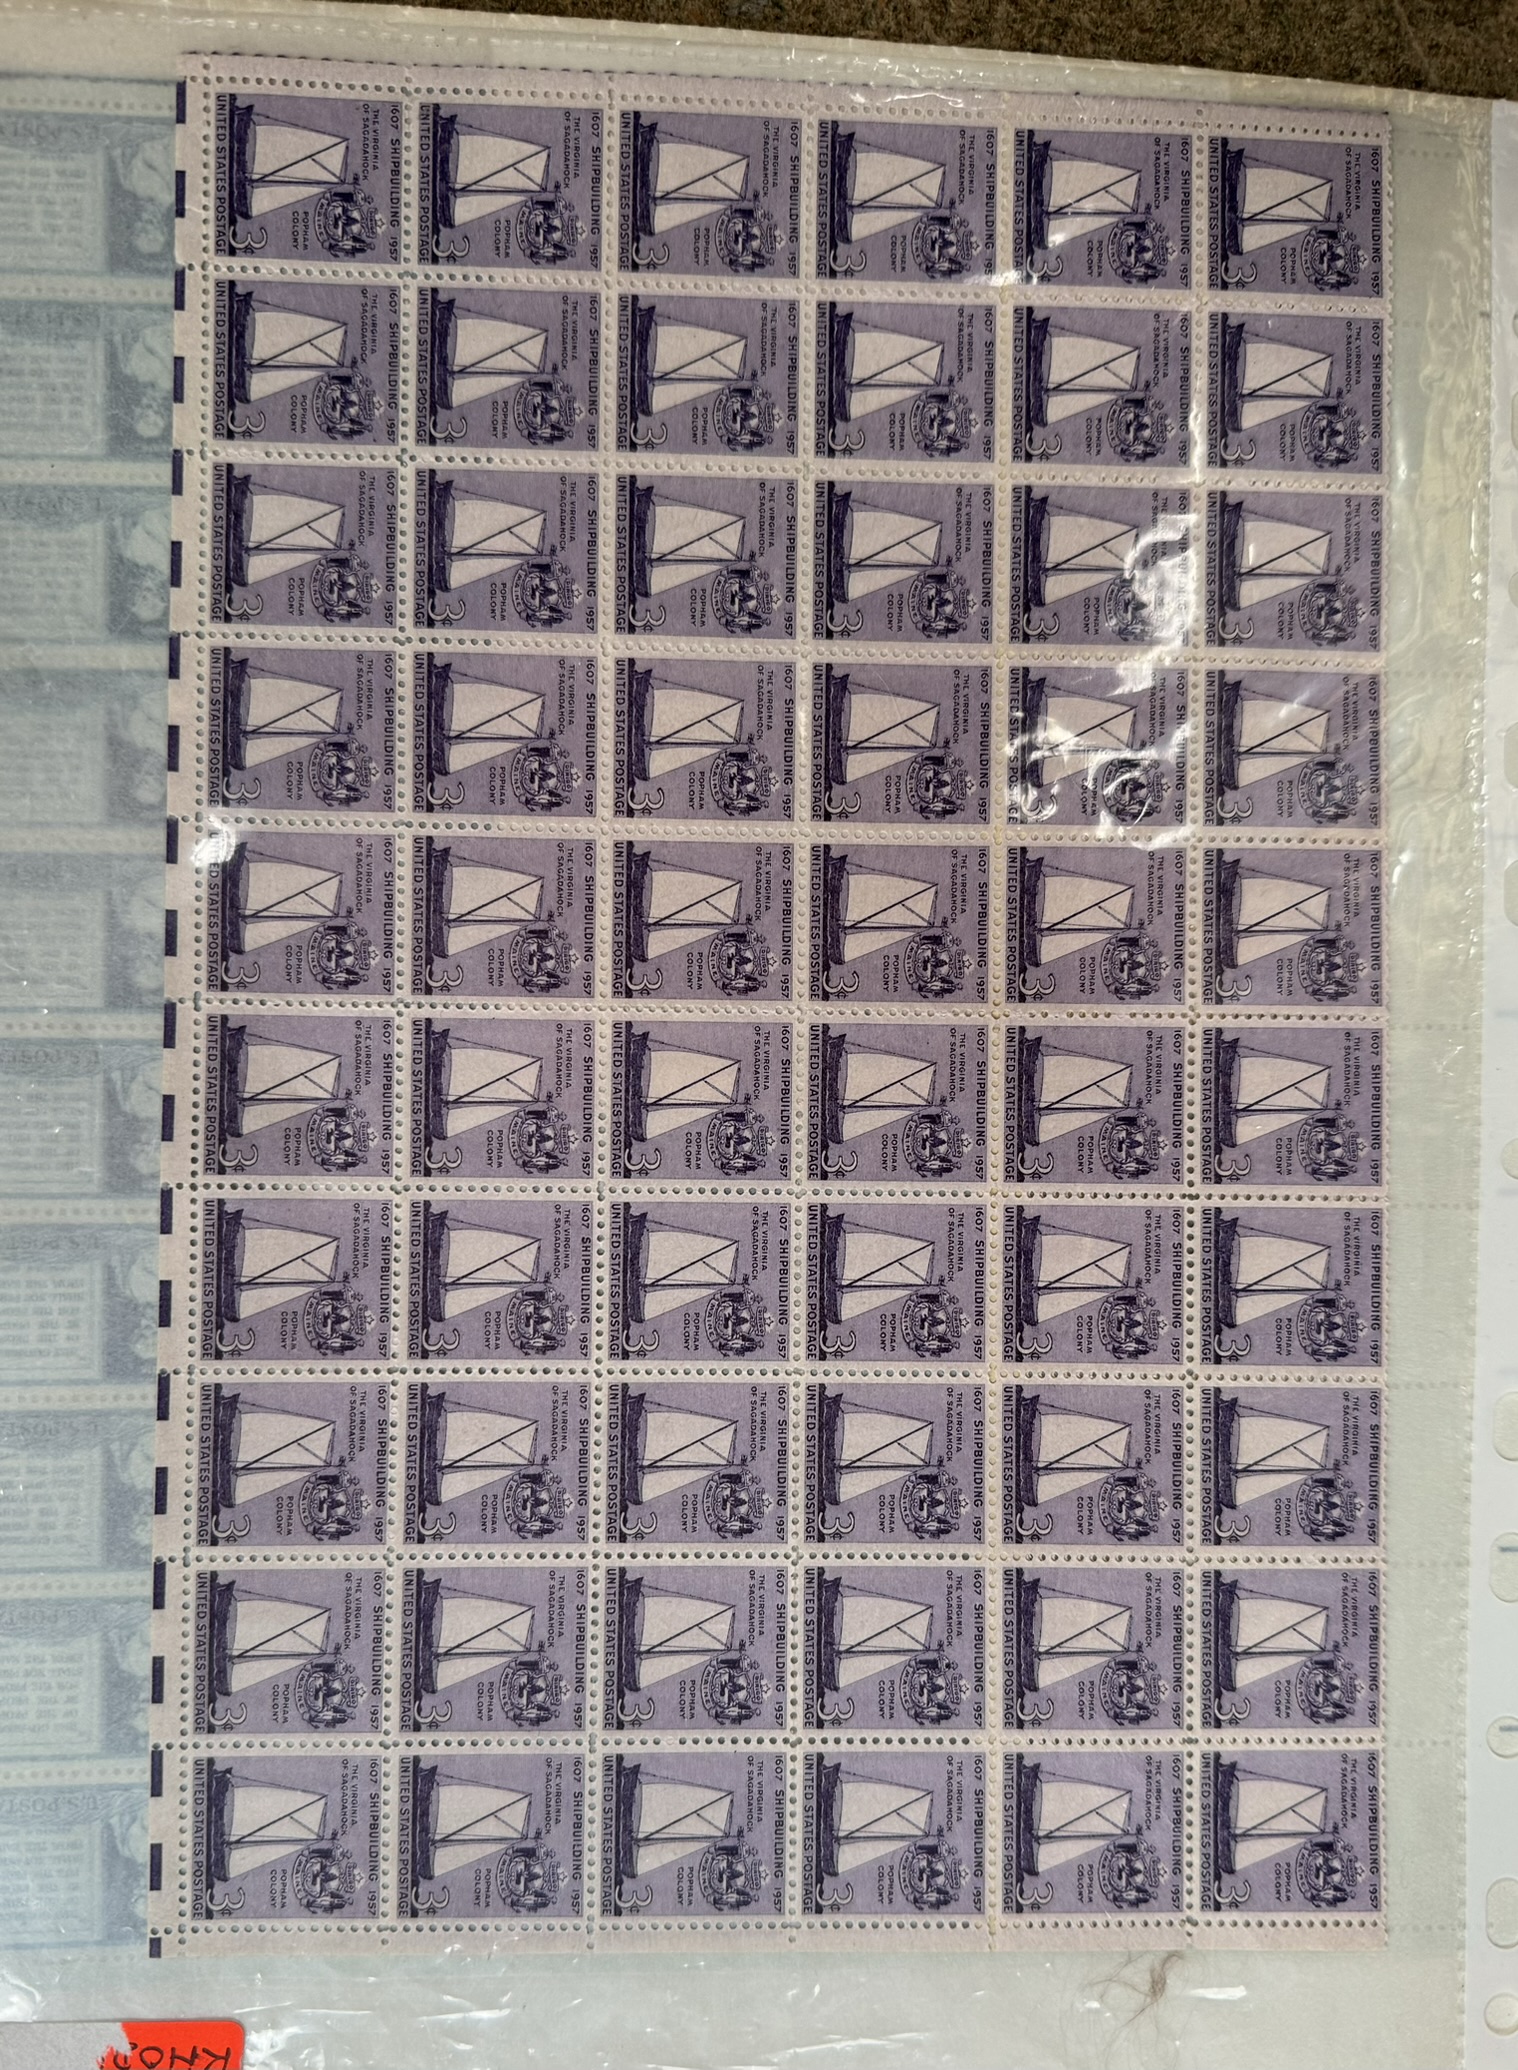 A folder of Double Mint Sheets including 3 Cents US Postage Abraham Lincoln, Nevada 1851-1951, - Image 3 of 9